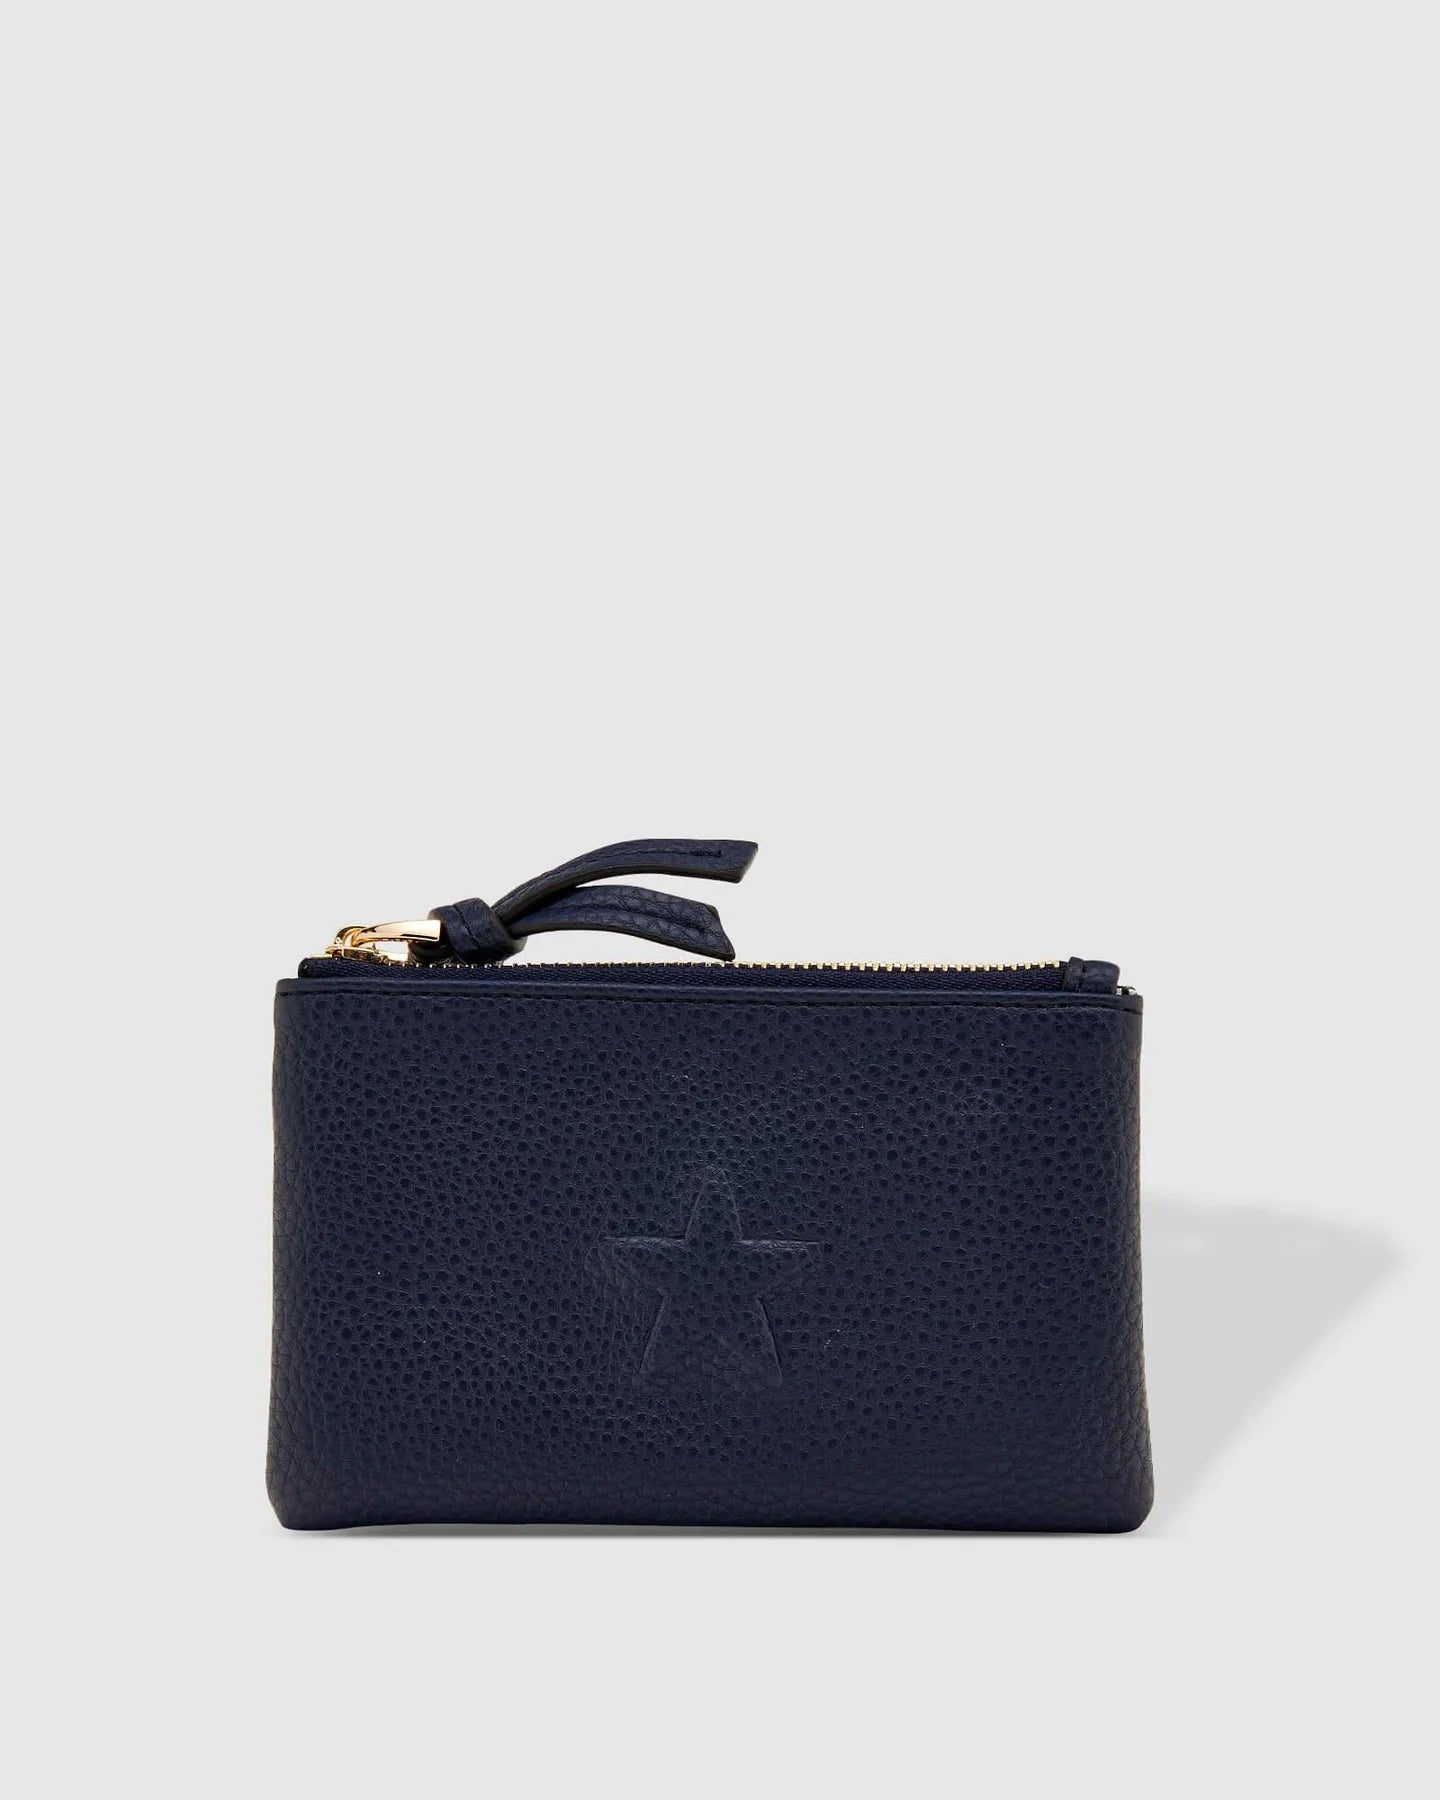 Star Purse (Navy) - Something For Me​​